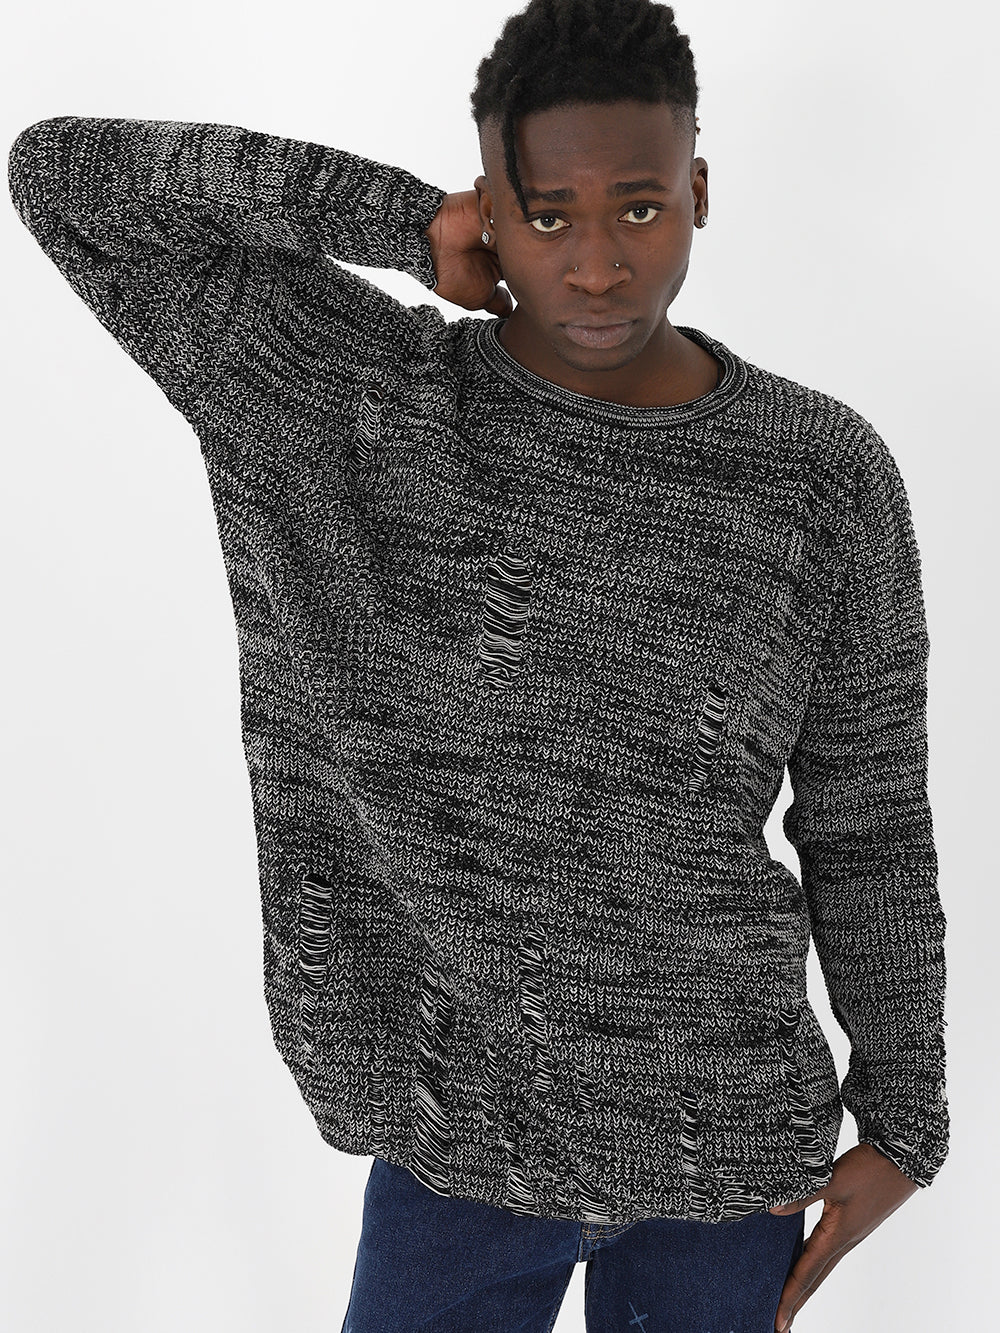 A man in a DISTRESSED GENTLEMAN SWEATER | GRAY, true to size fit, is posing for a photo.